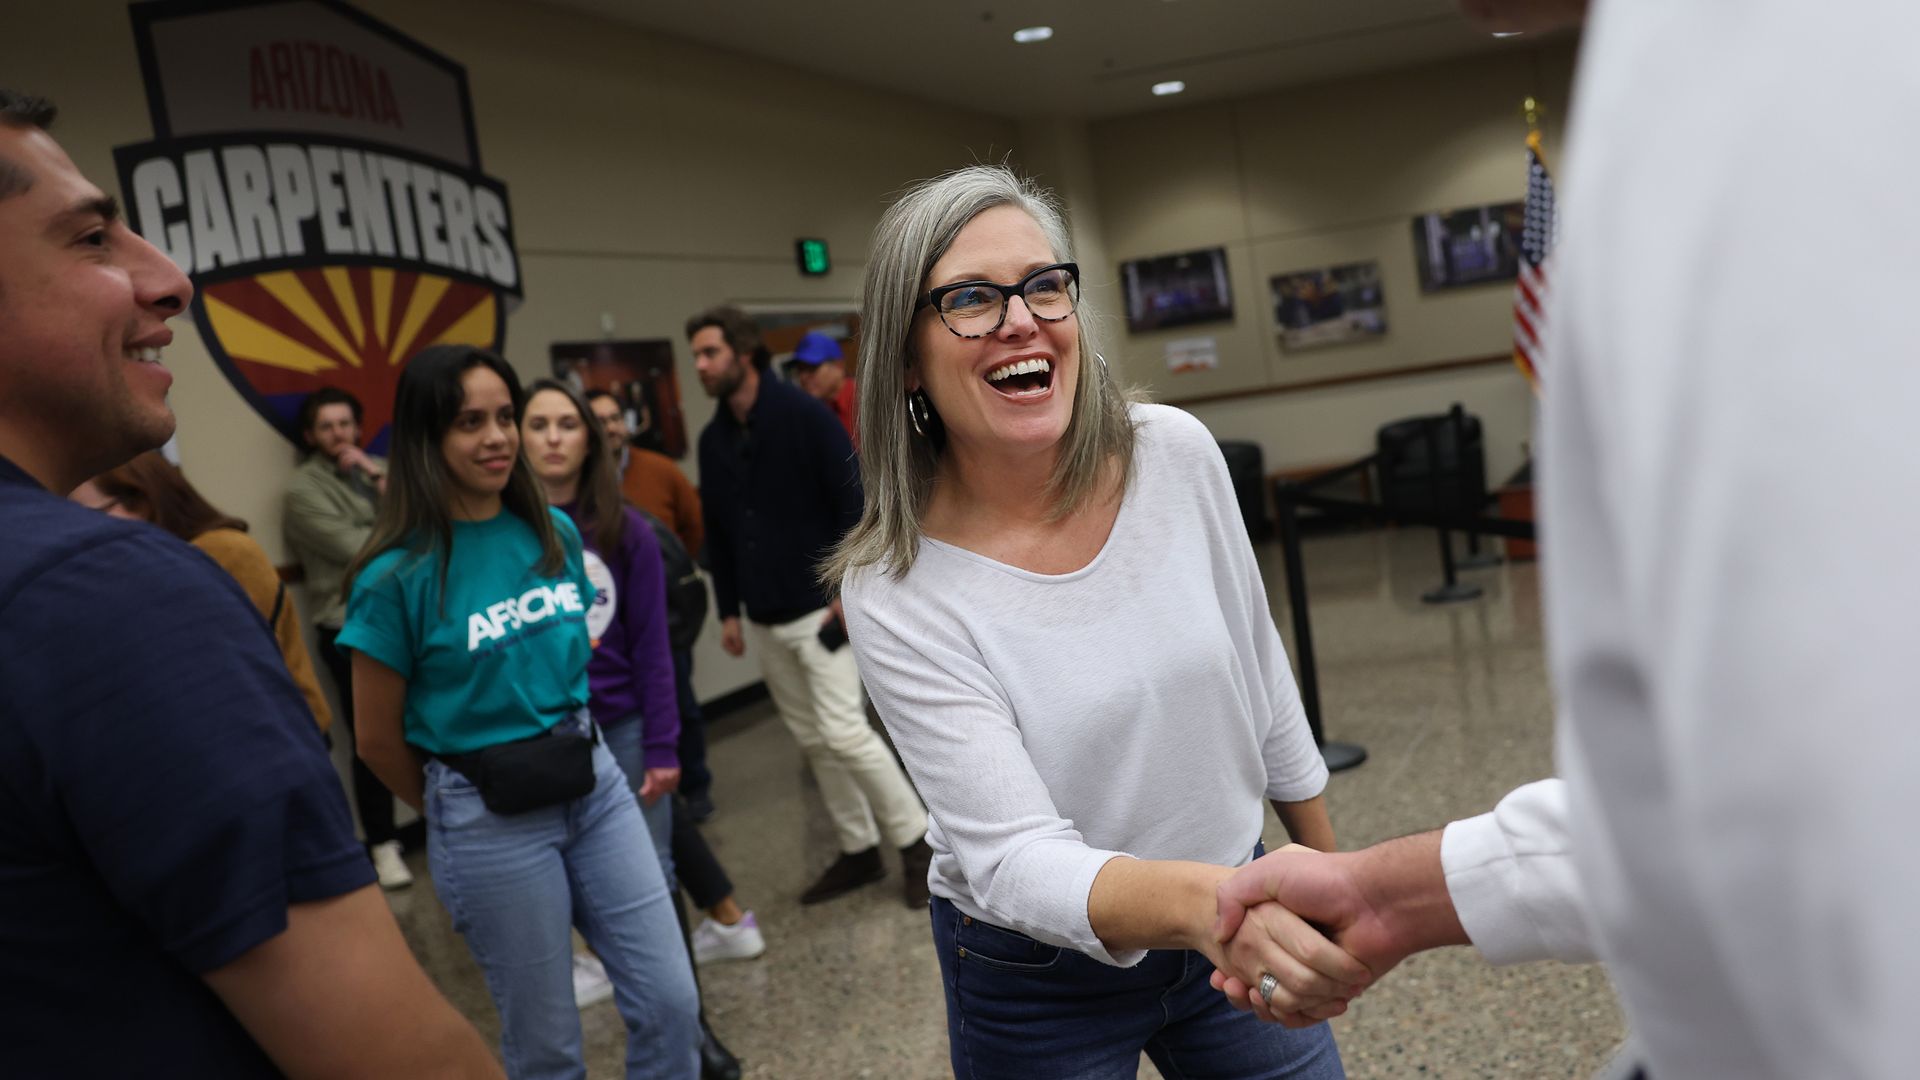 Arizona Democratic gubernatorial candidate Katie Hobbs greets supporters during a campaign event at the Carpenters Local Union 1912 headquarters on November 05, 2022 in Phoenix, Arizona. 